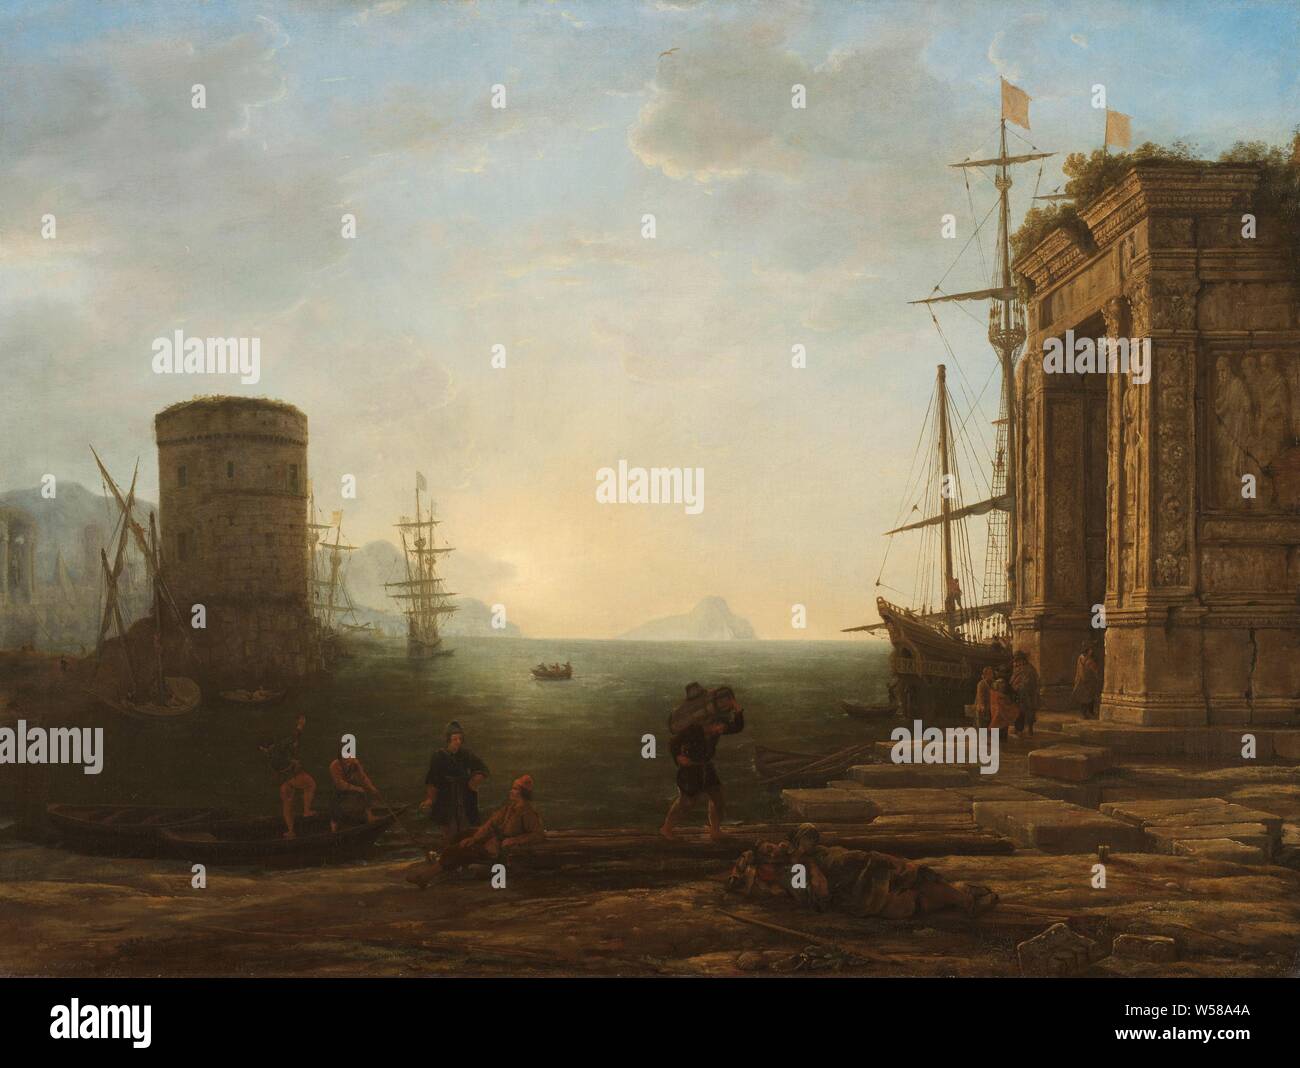 Harbor at Sunrise, An imaginary harbor at the crack of the day. On the right a Roman triumphal arch (based on the Arco degli Argentieri in Rome) with four travelers below. Behind the triumphal arch a sailing ship with two yellow flags on the masts. On the left a round tower (based on the tower of the castle in Tivoli) with four ships around it. In the background an antique city with a pyramid and buildings decorated with statues. In the foreground on the left a boat, two talking men, a man carrying a barrel on his back and a sleeping man with a walking stick next to him. On the horizon in Stock Photo